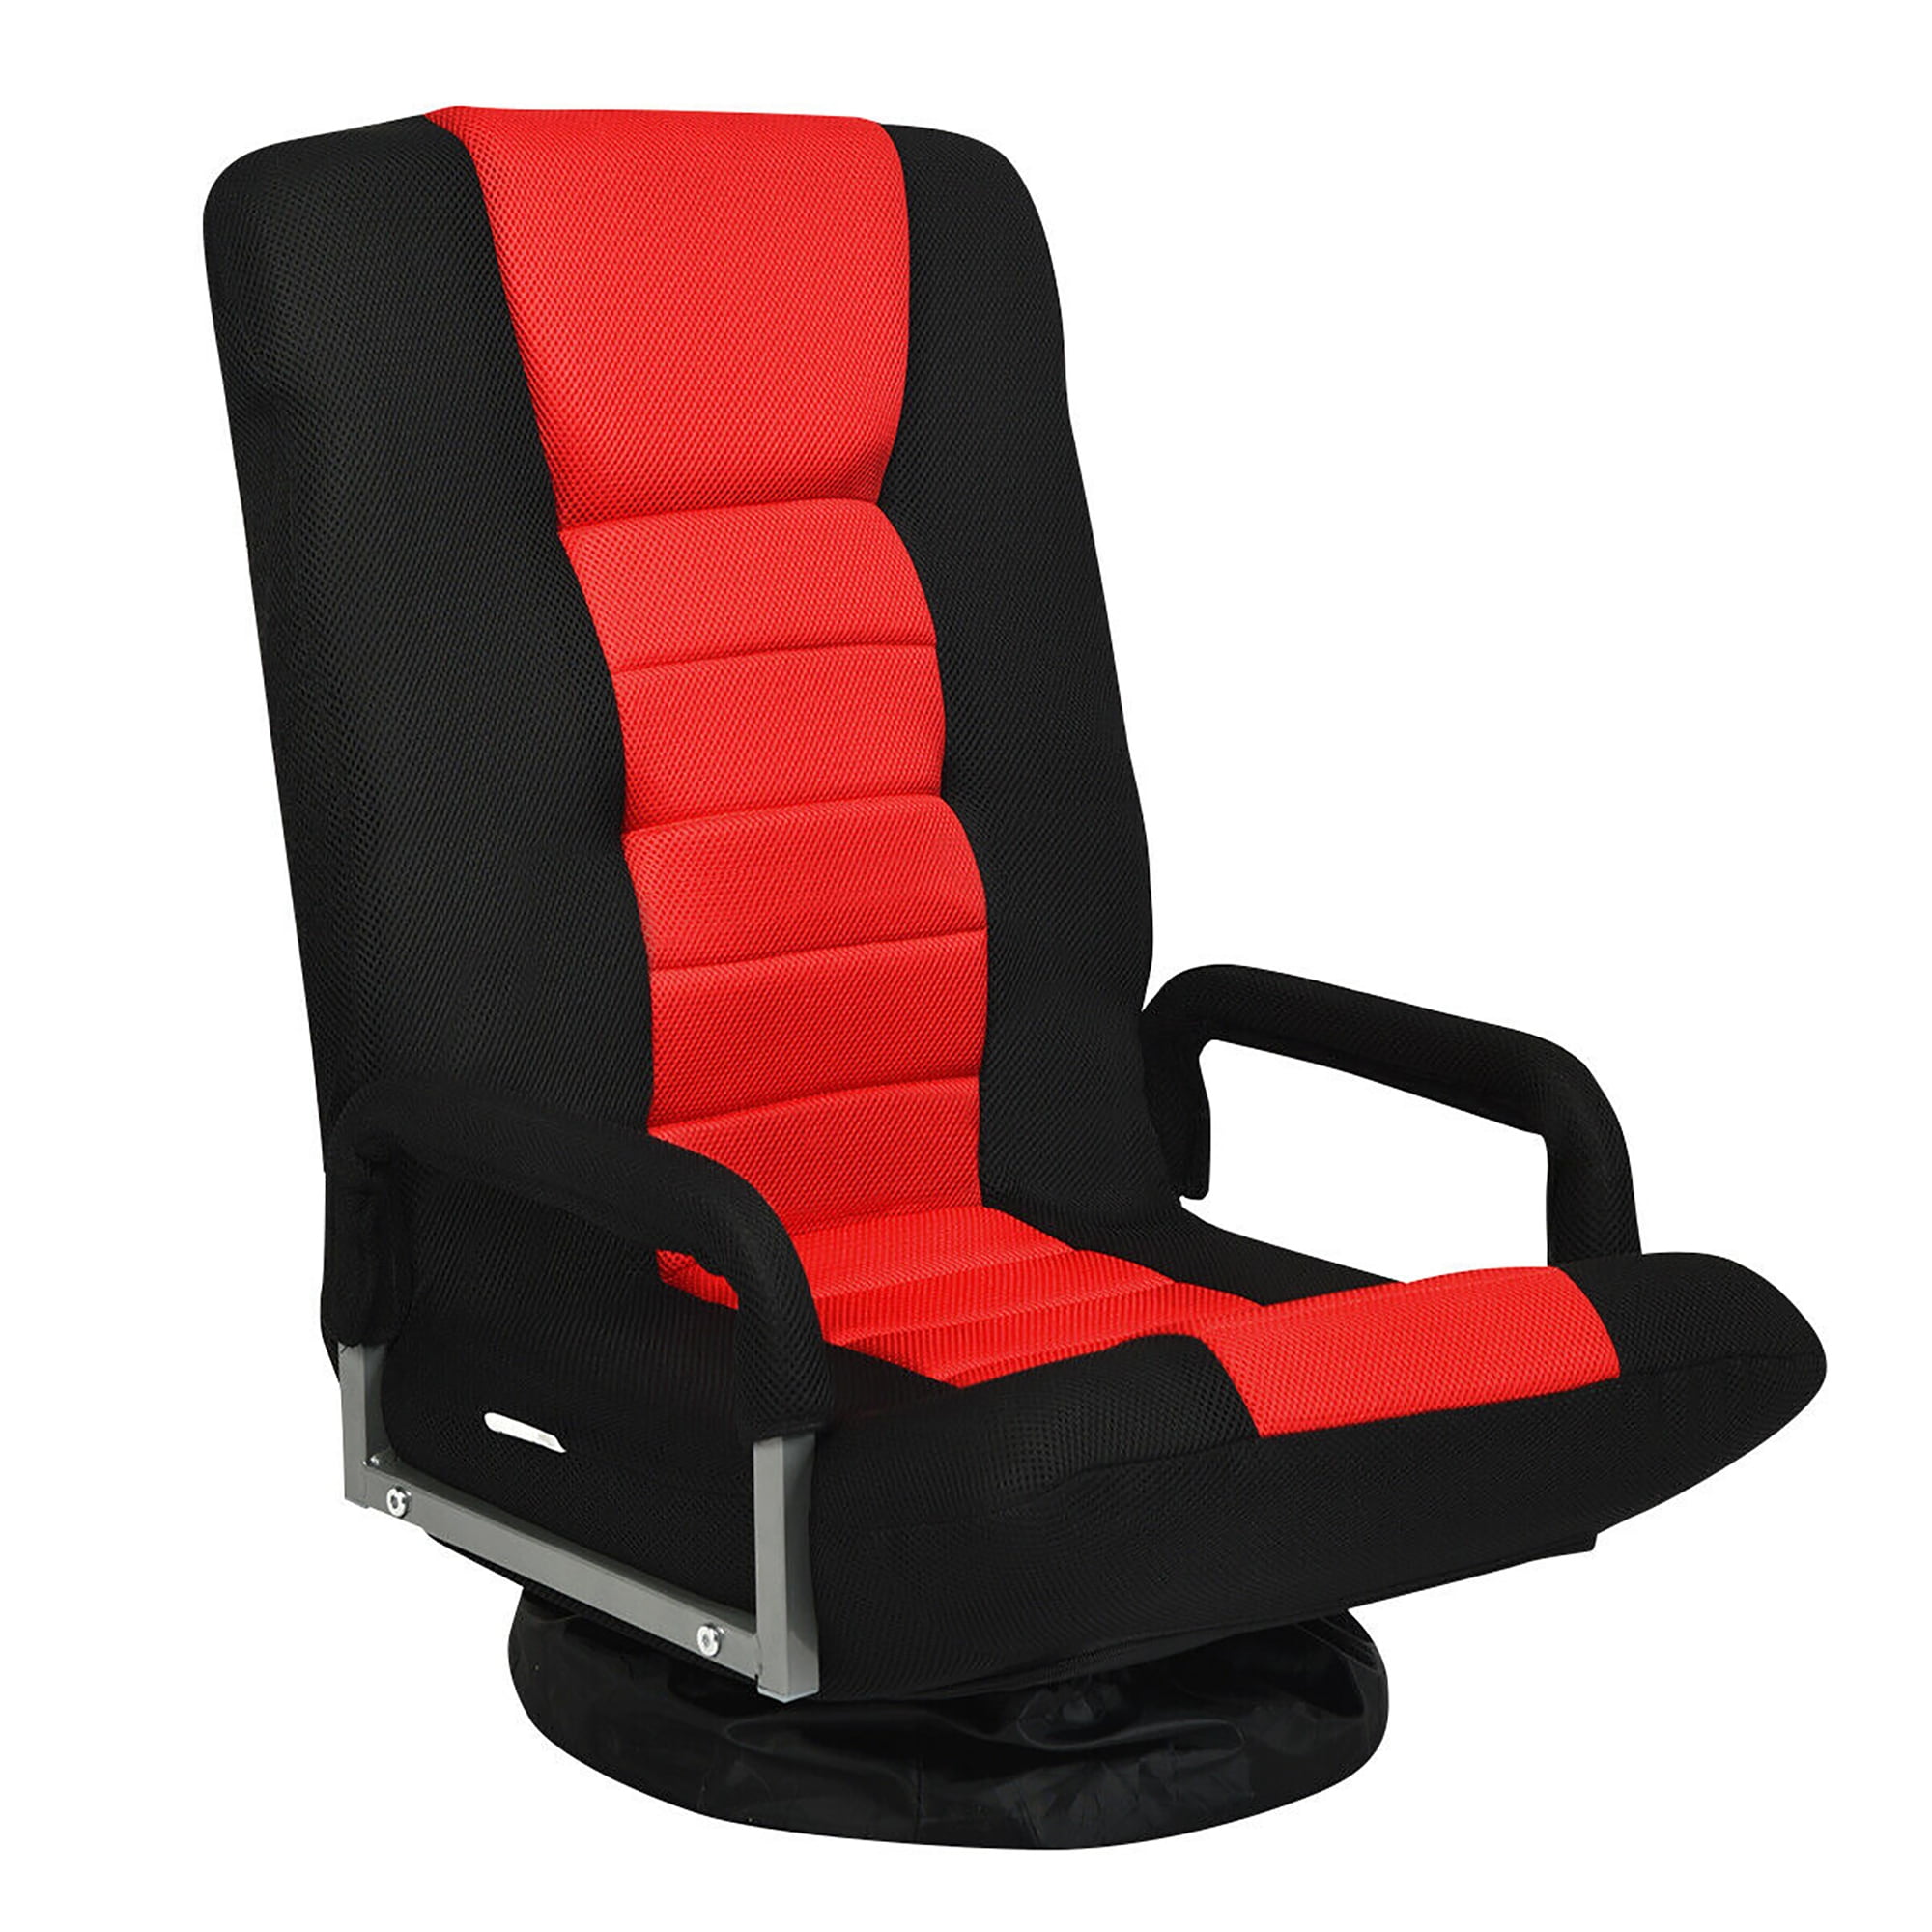 360Degree Swivel Gaming Floor Chair with Foldable